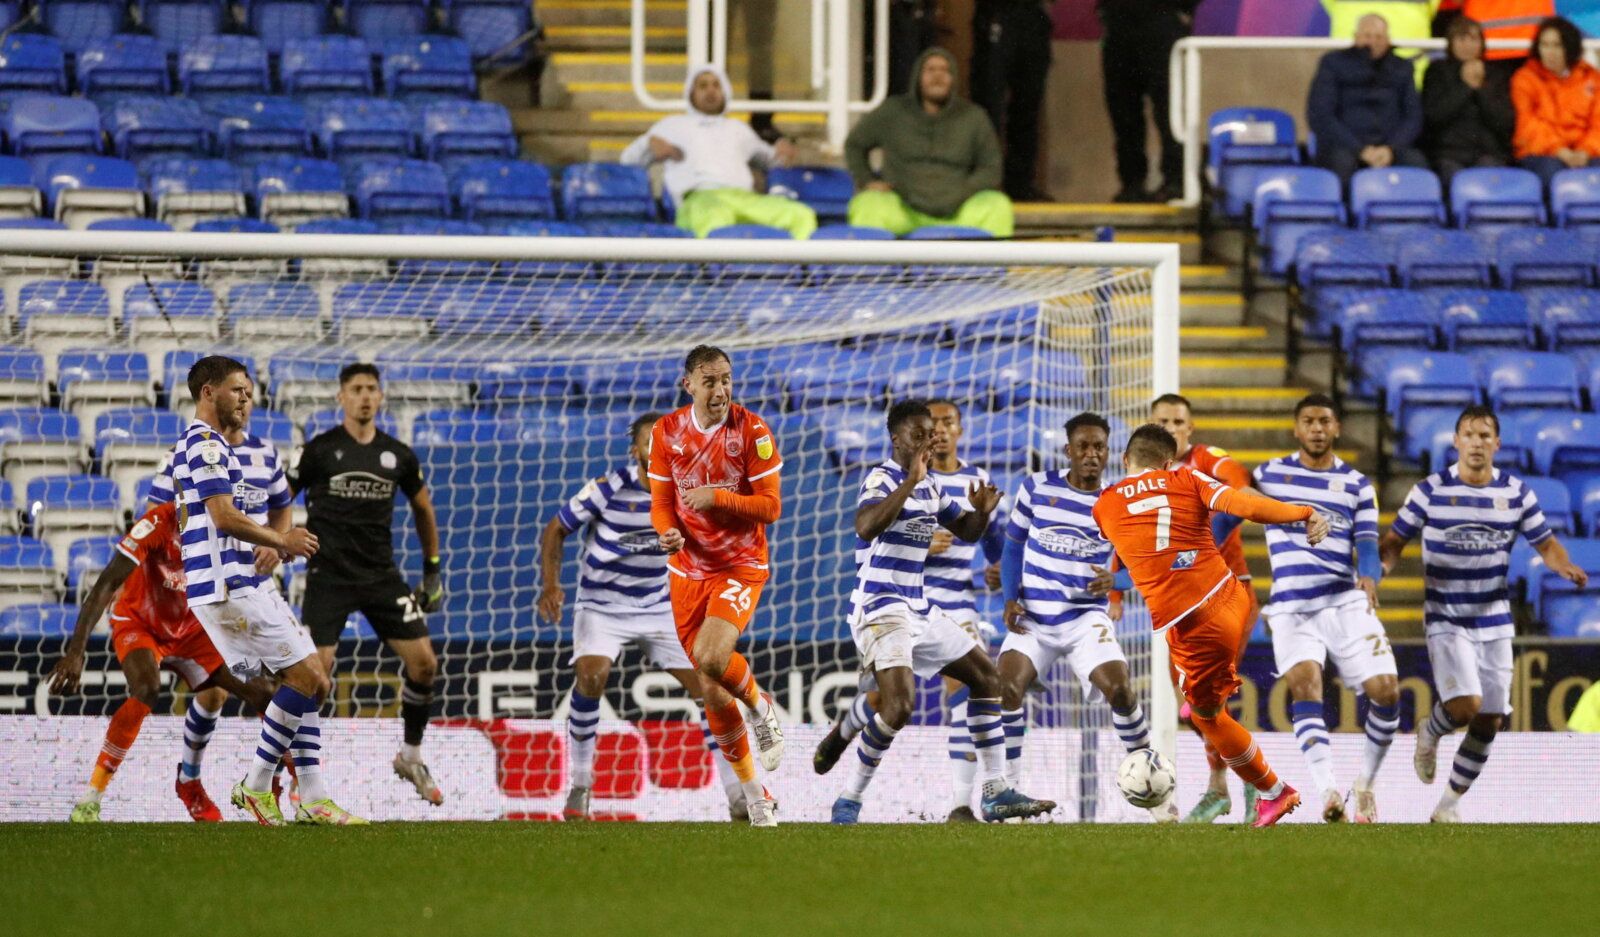 Soccer Football - Championship - Reading v Blackpool - Madejski Stadium, Reading, Britain - October 20, 2021 Blackpool’s Owen Dale scores their first goal    Action Images/Andrew Boyers  EDITORIAL USE ONLY. No use with unauthorized audio, video, data, fixture lists, club/league logos or 